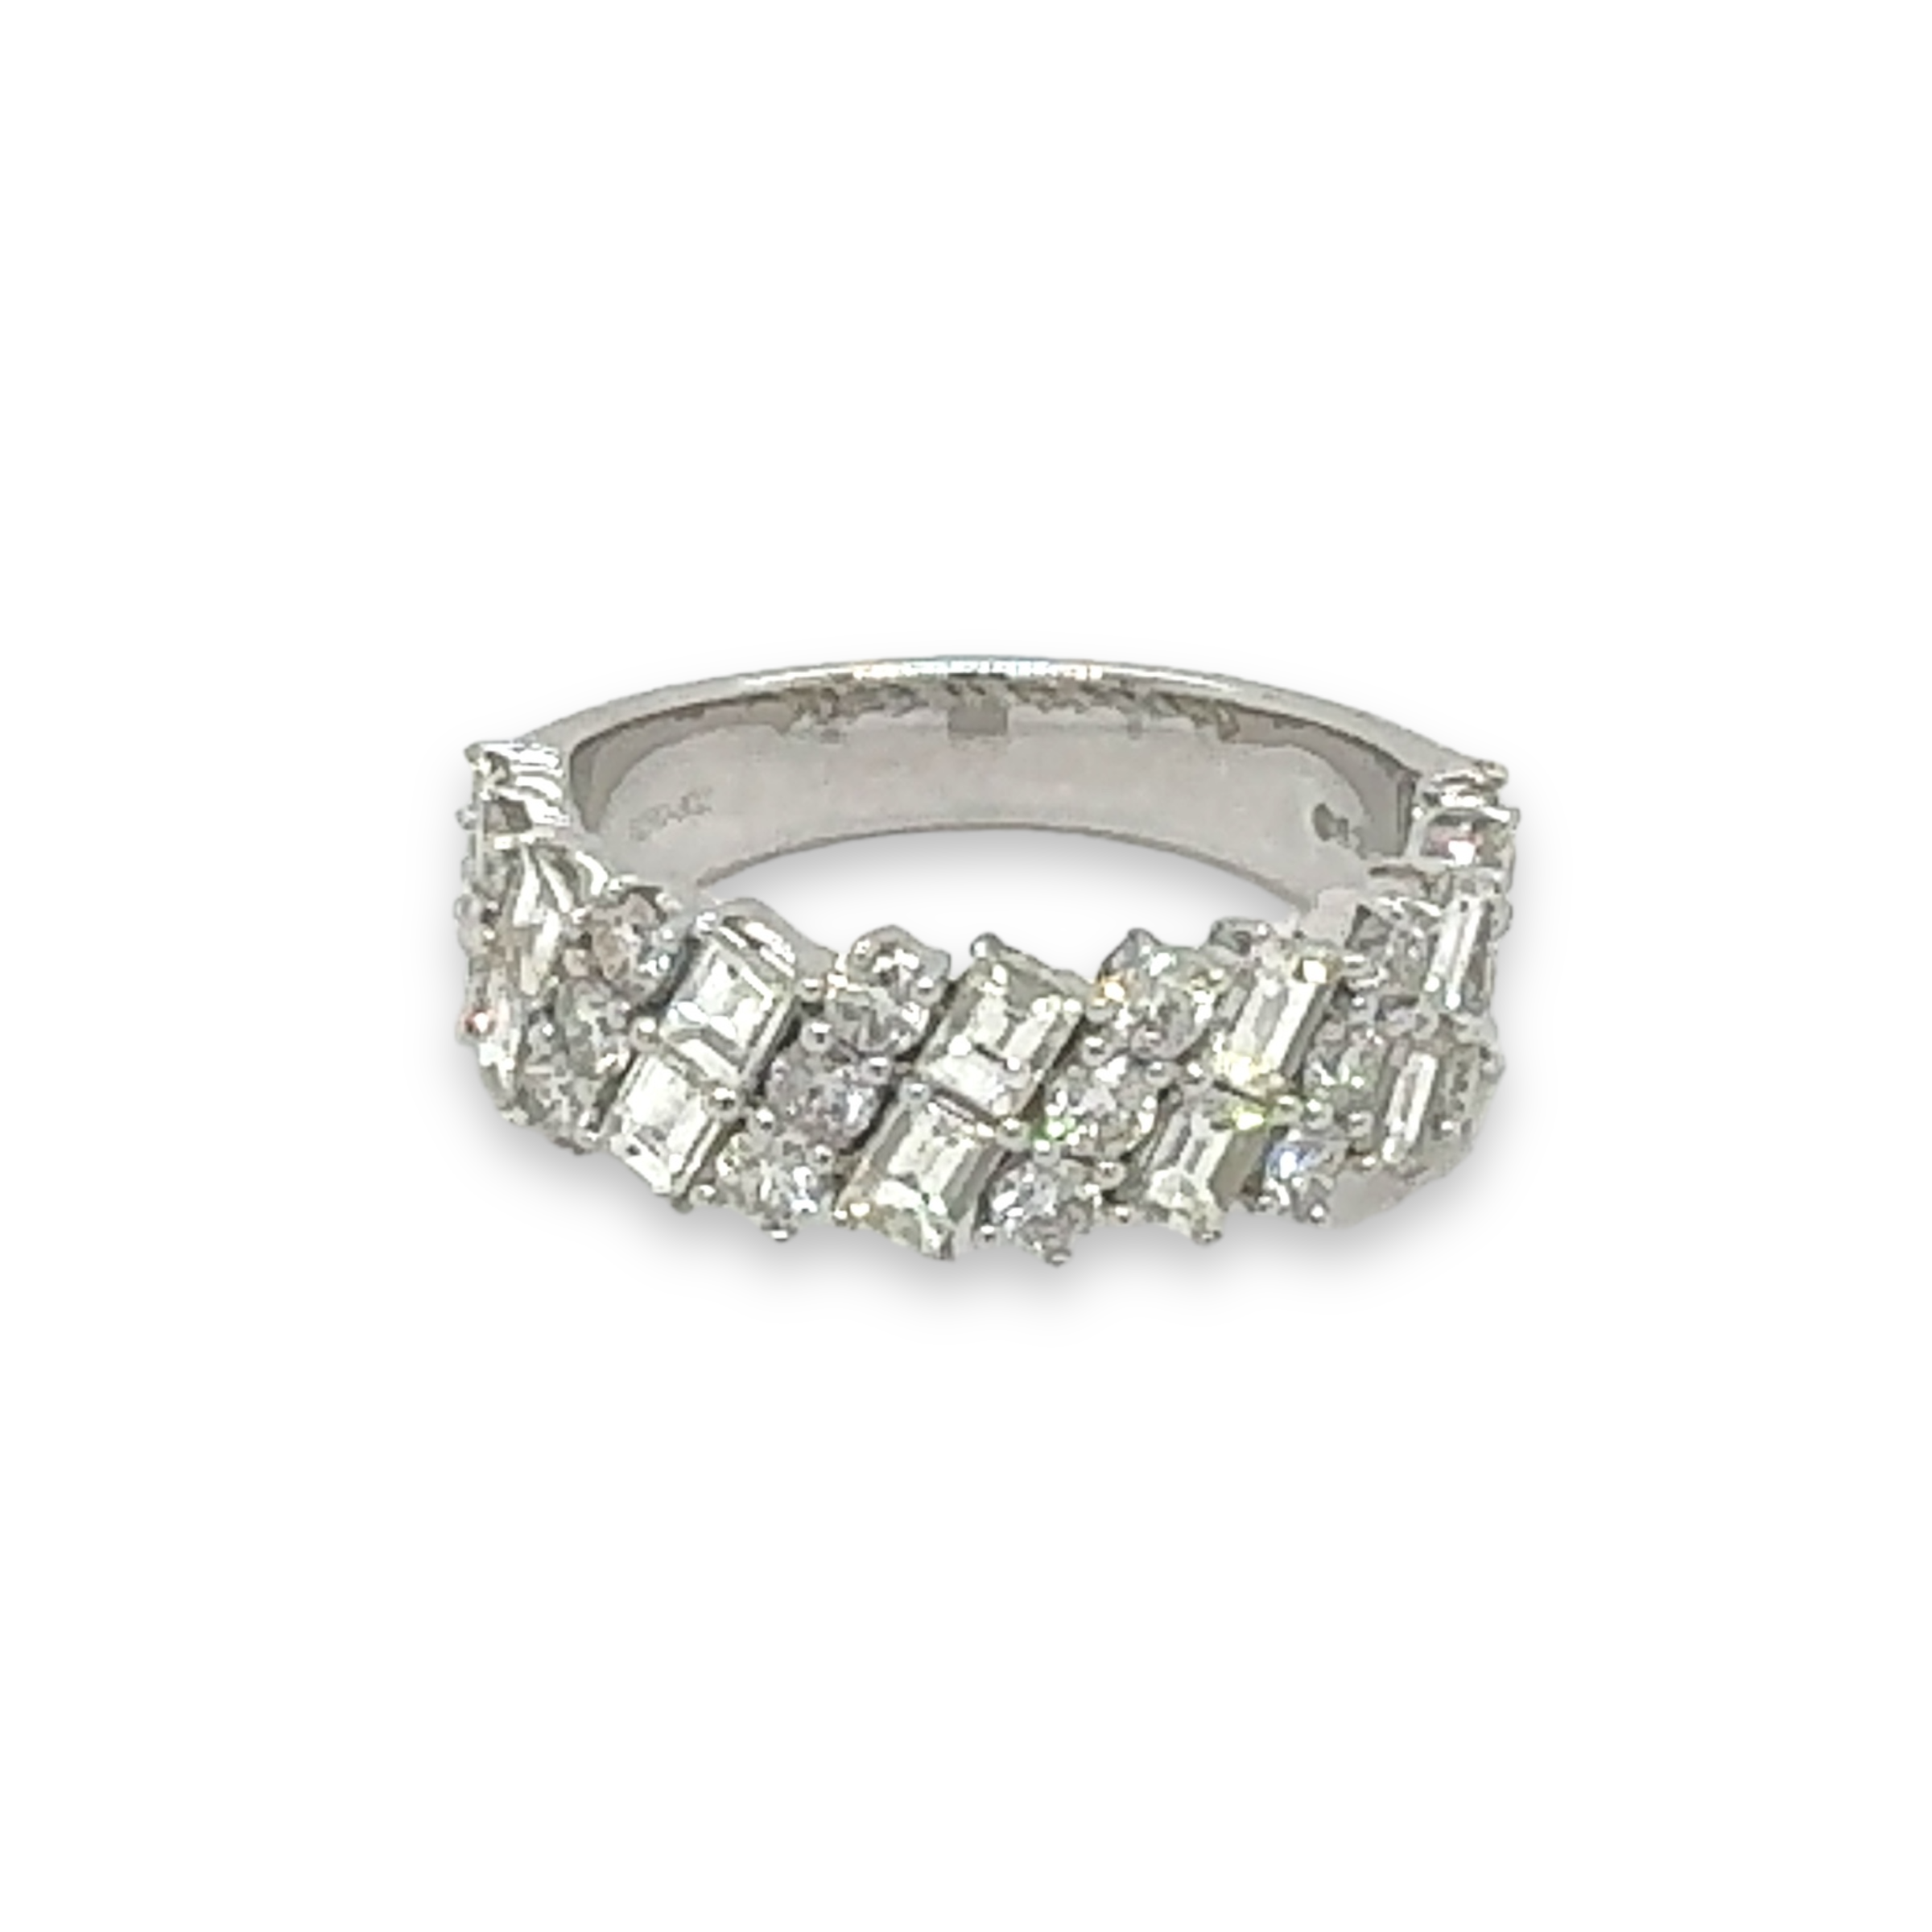 Round and Baguette Diamond Anniversary Ring in 14k White Gold